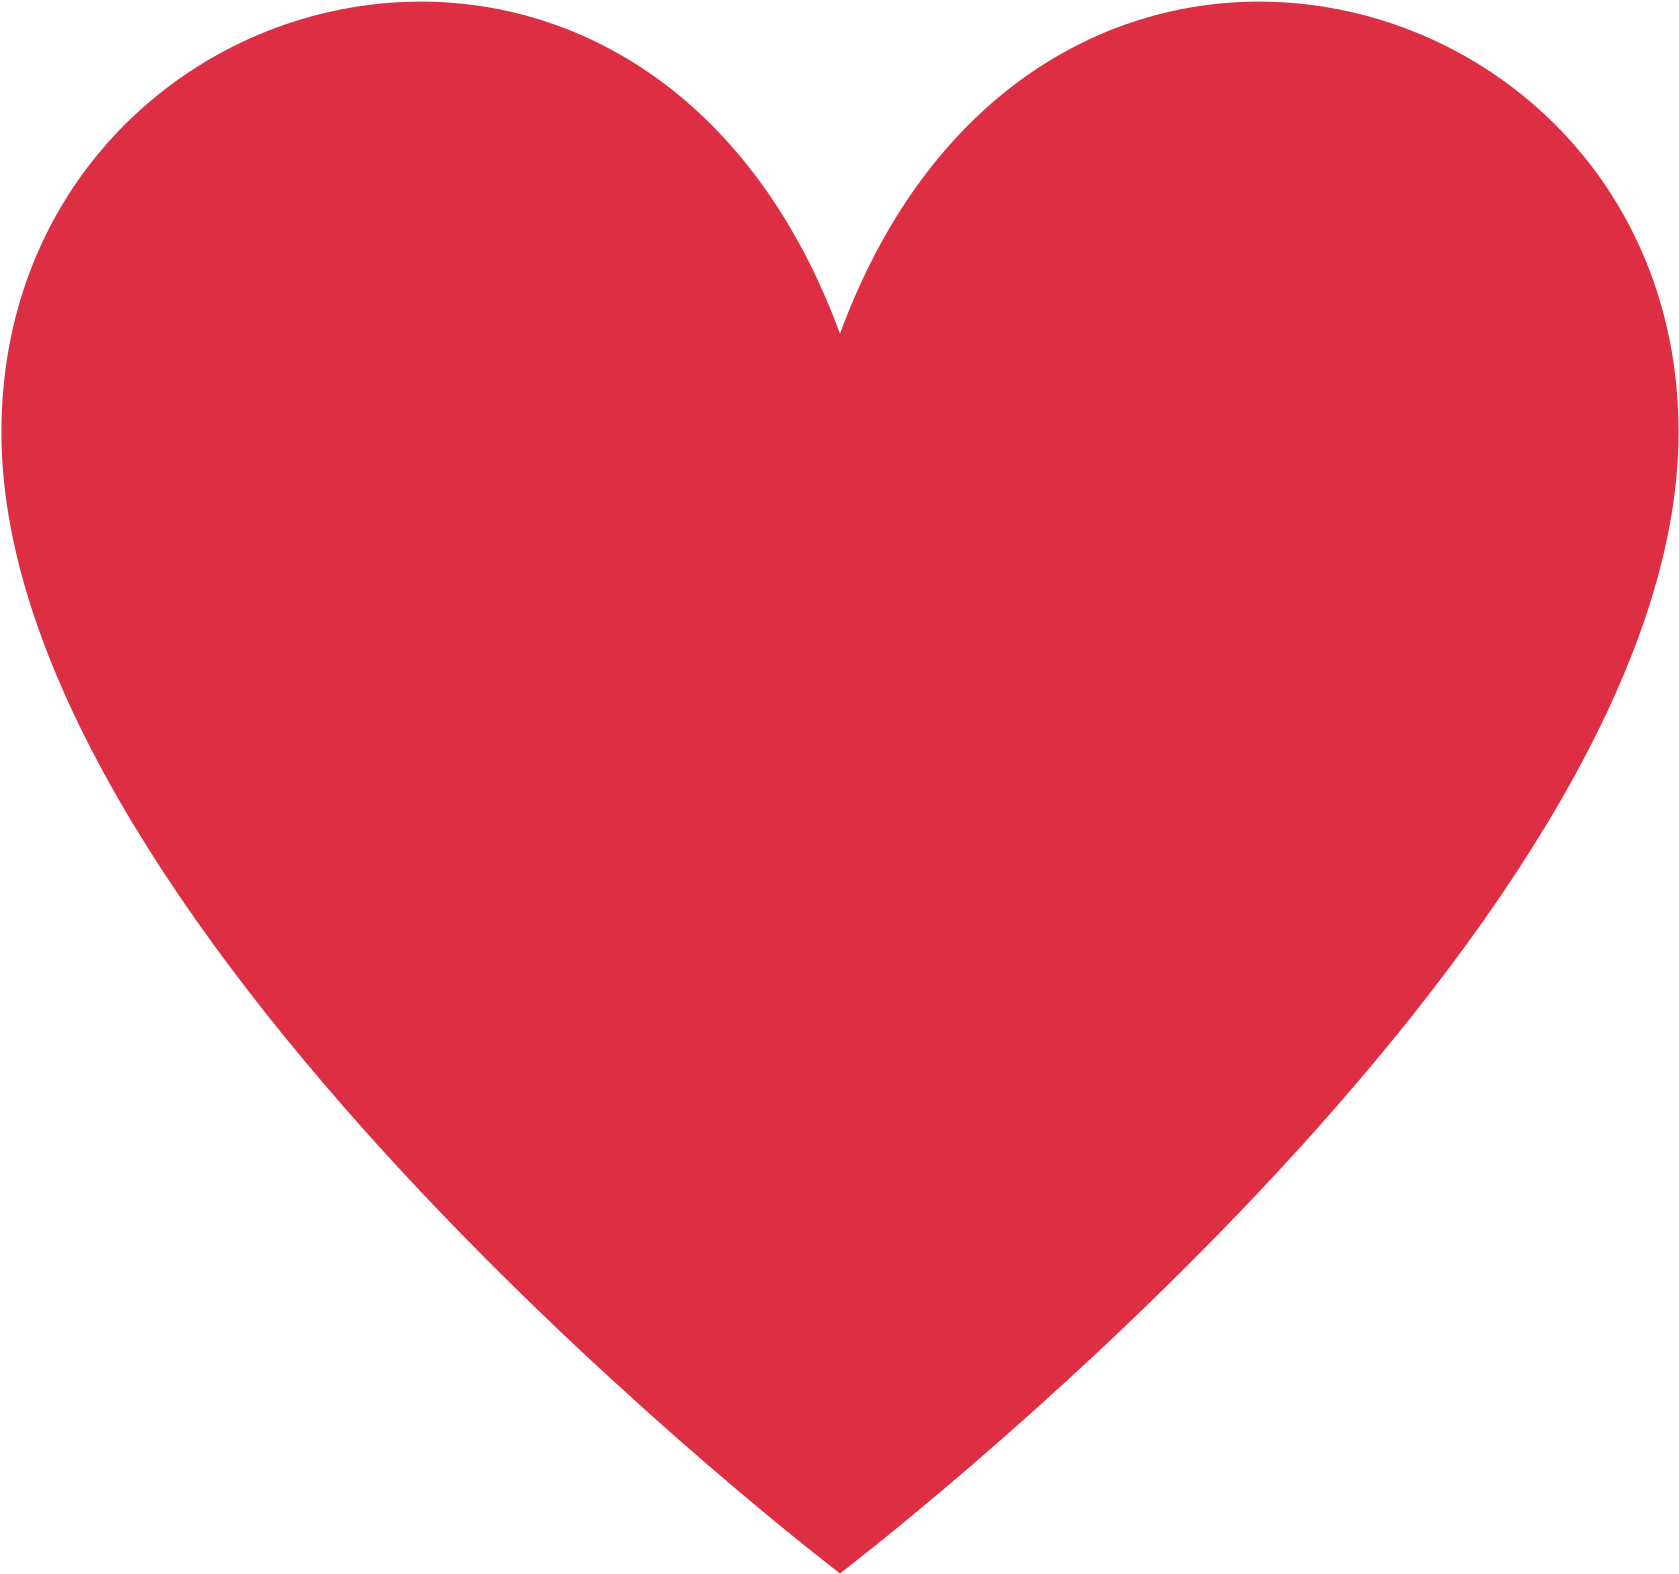 Yesterday Was The Day Of Love And We're All About Heart - Instagram Like Icon Png (2000x2000)